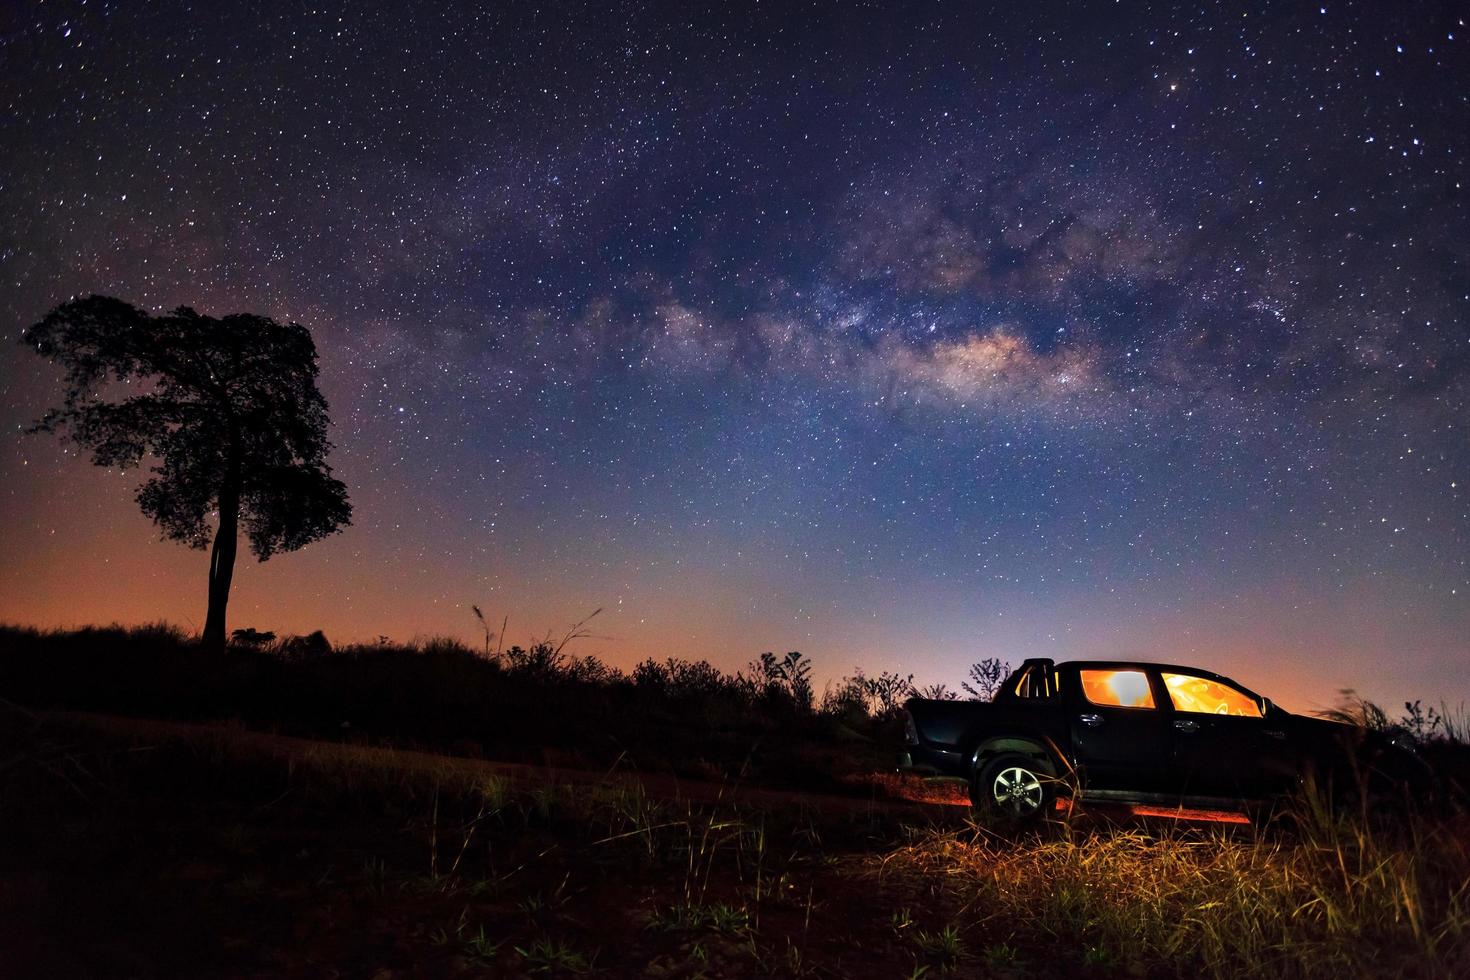 Night landscape on field with car and Milky Way. Long exposure photograph.with grain photo